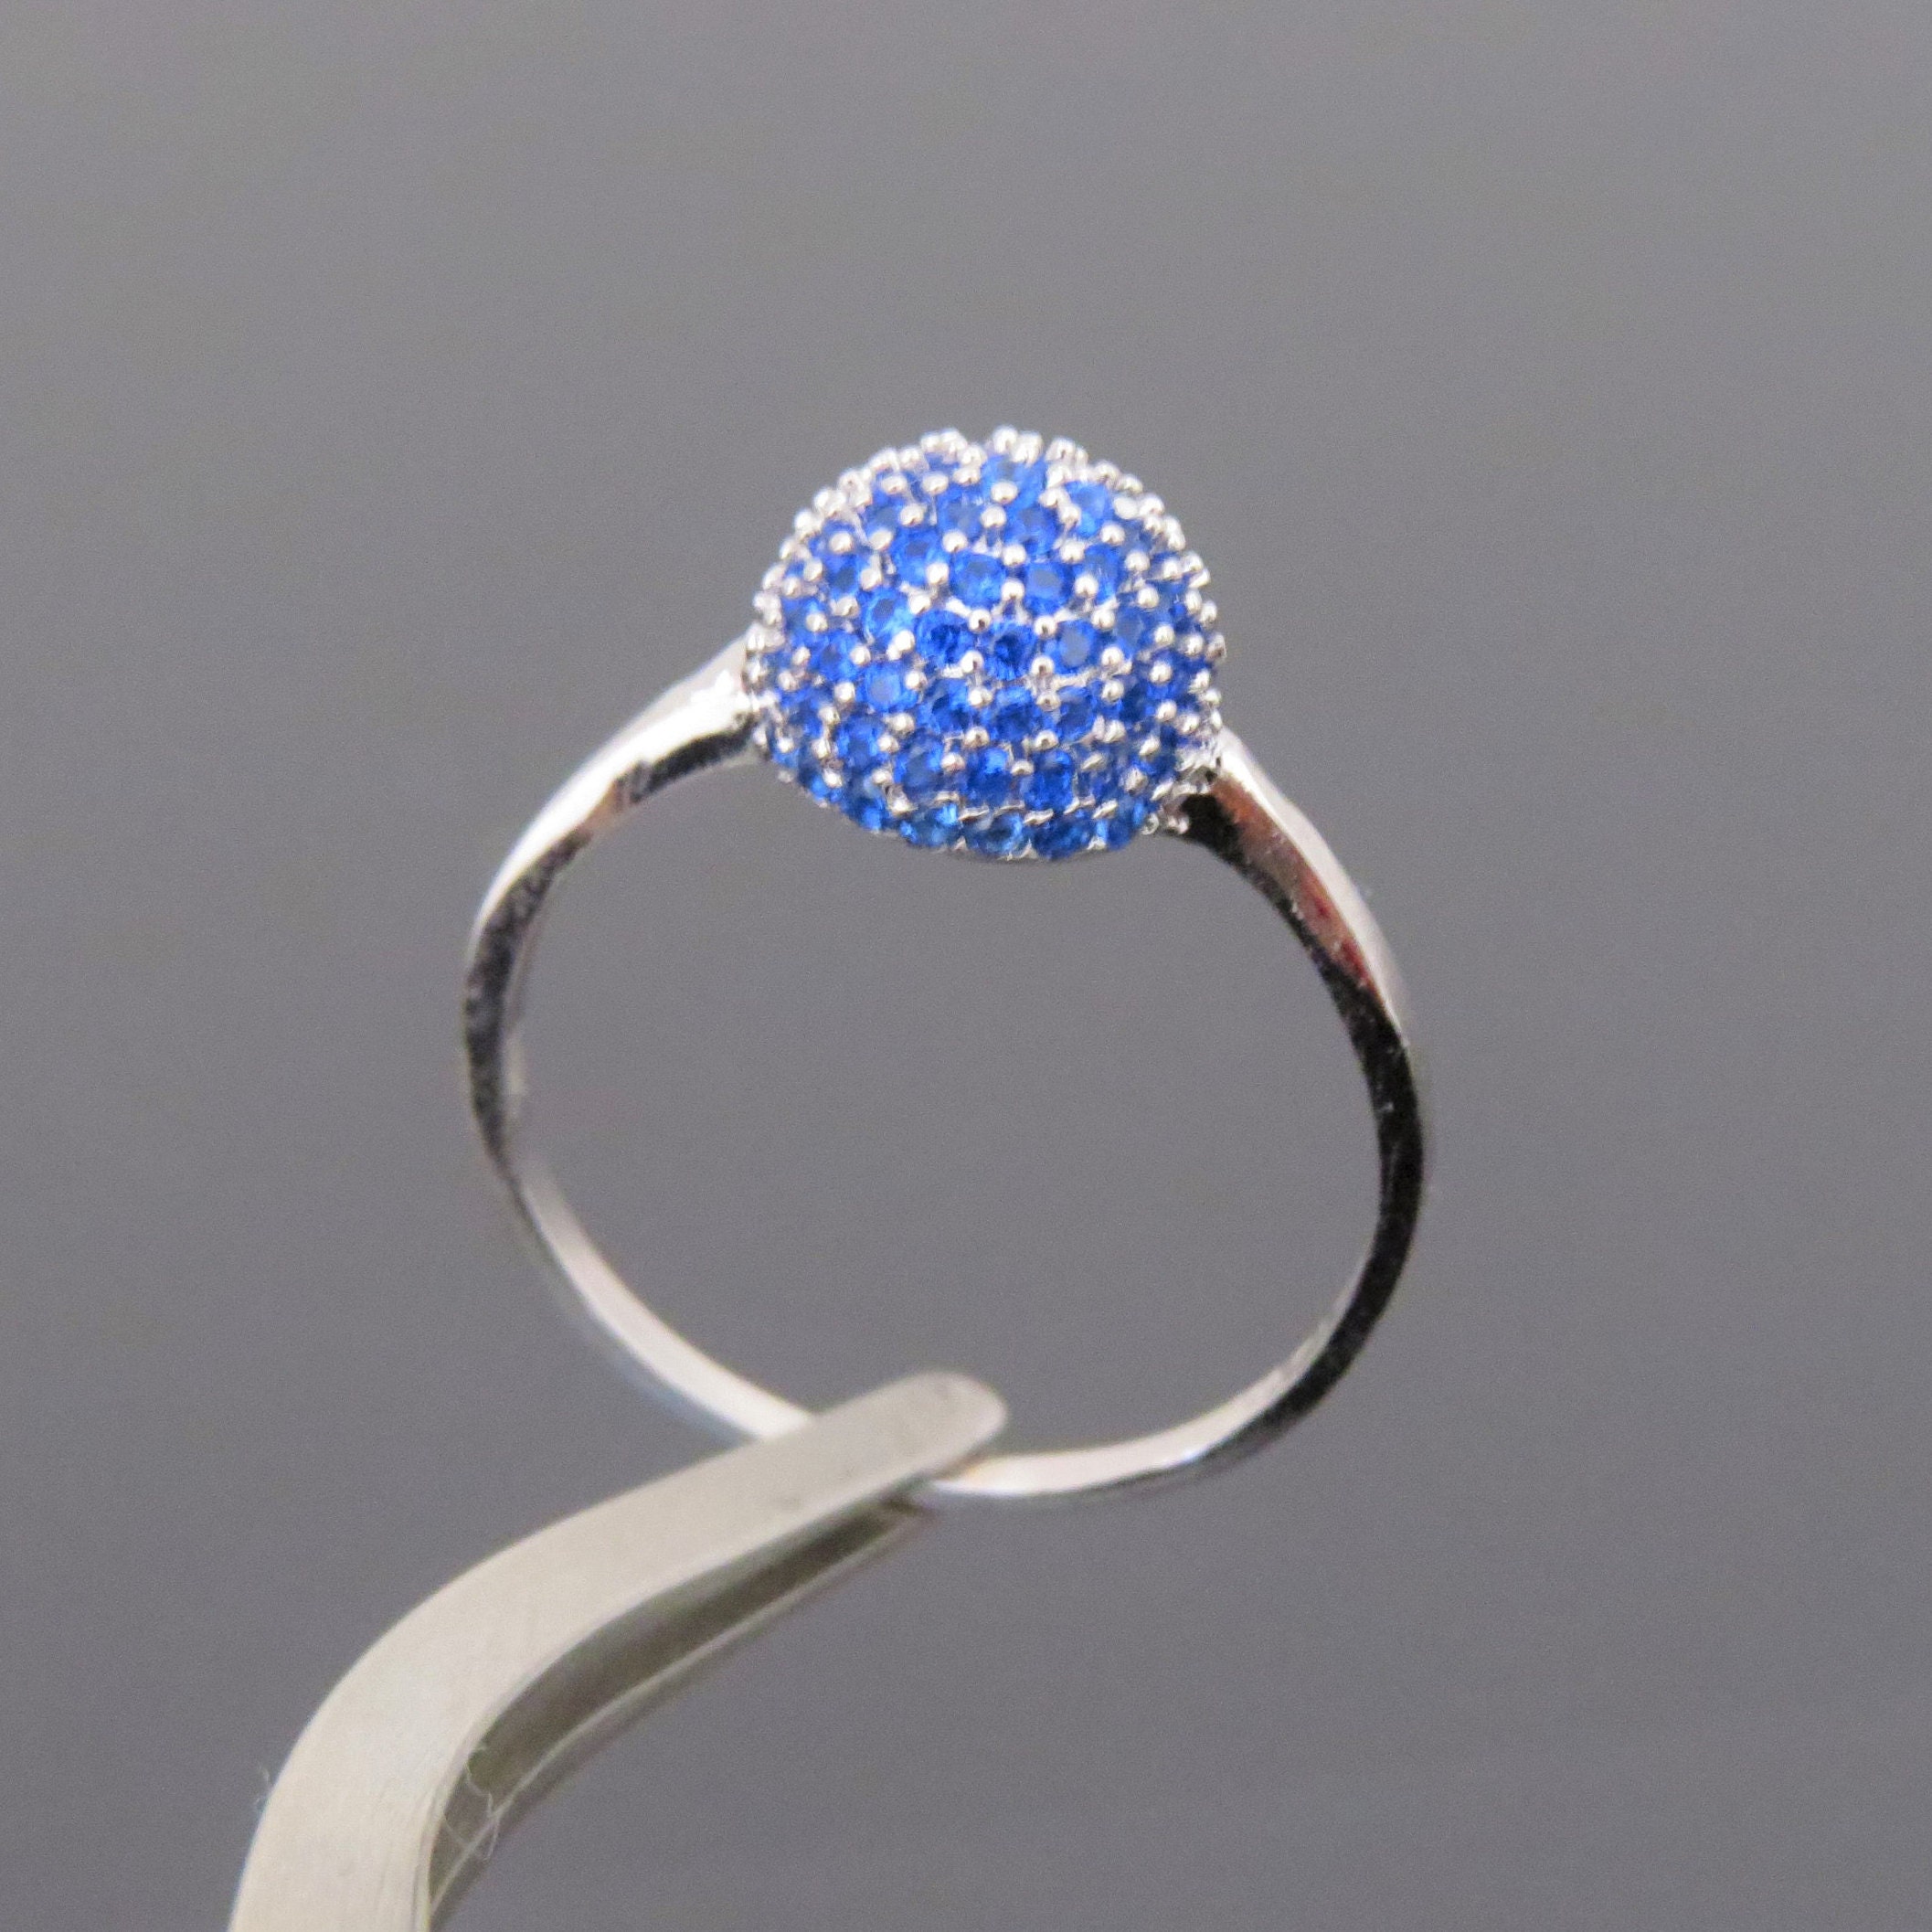 Vintage 18K Solid White Gold Blue Sapphire Ball Pave Ring Size 6 